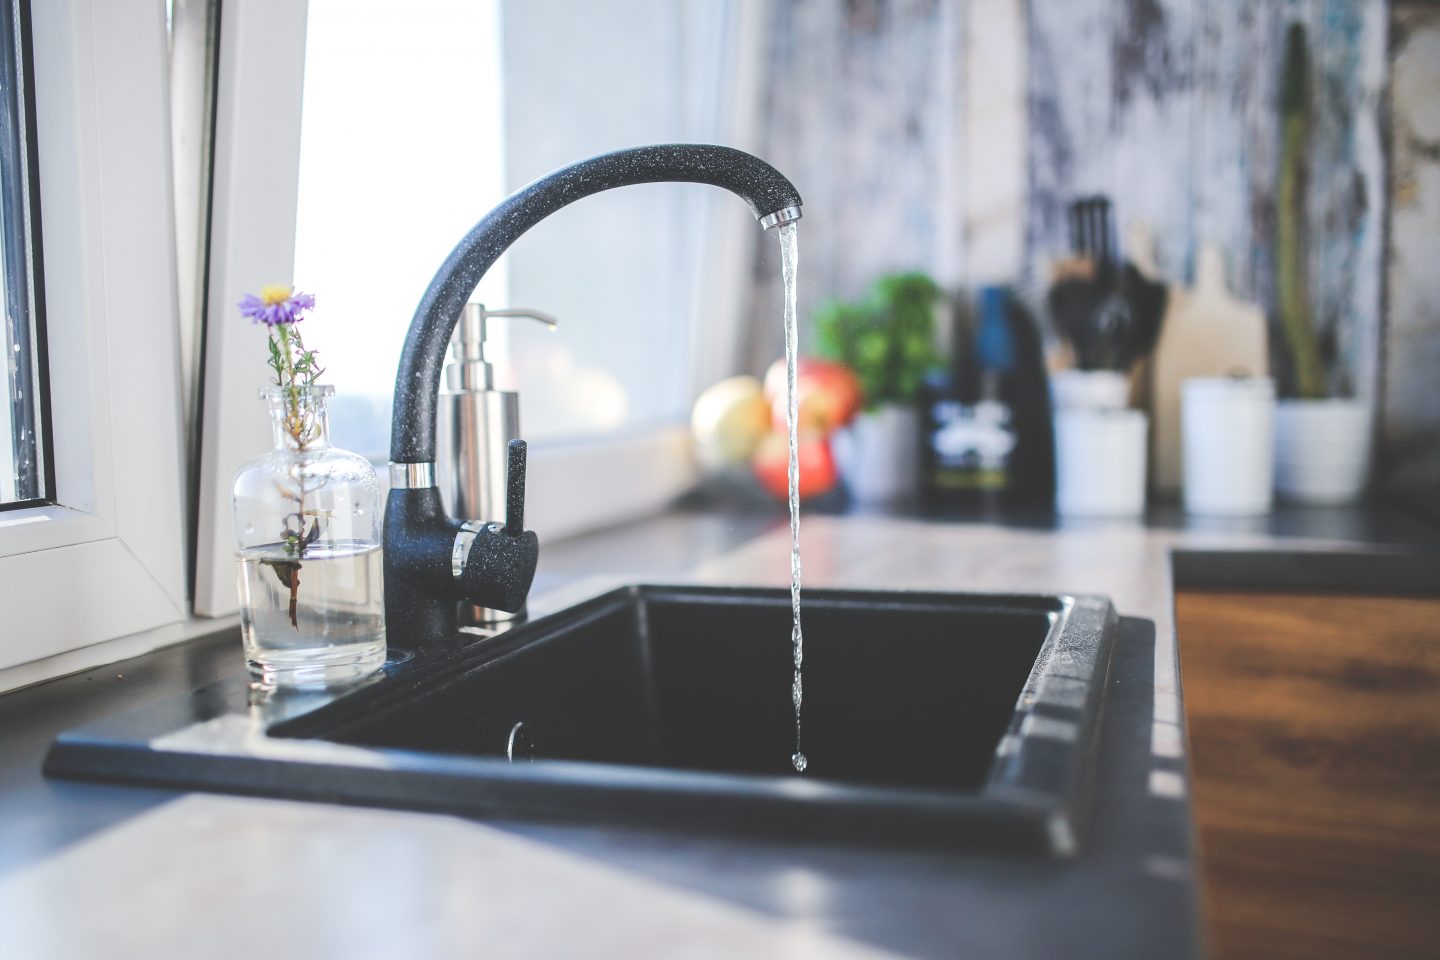 3 Natural Ways to Clean and Disinfect your Kitchen Sink